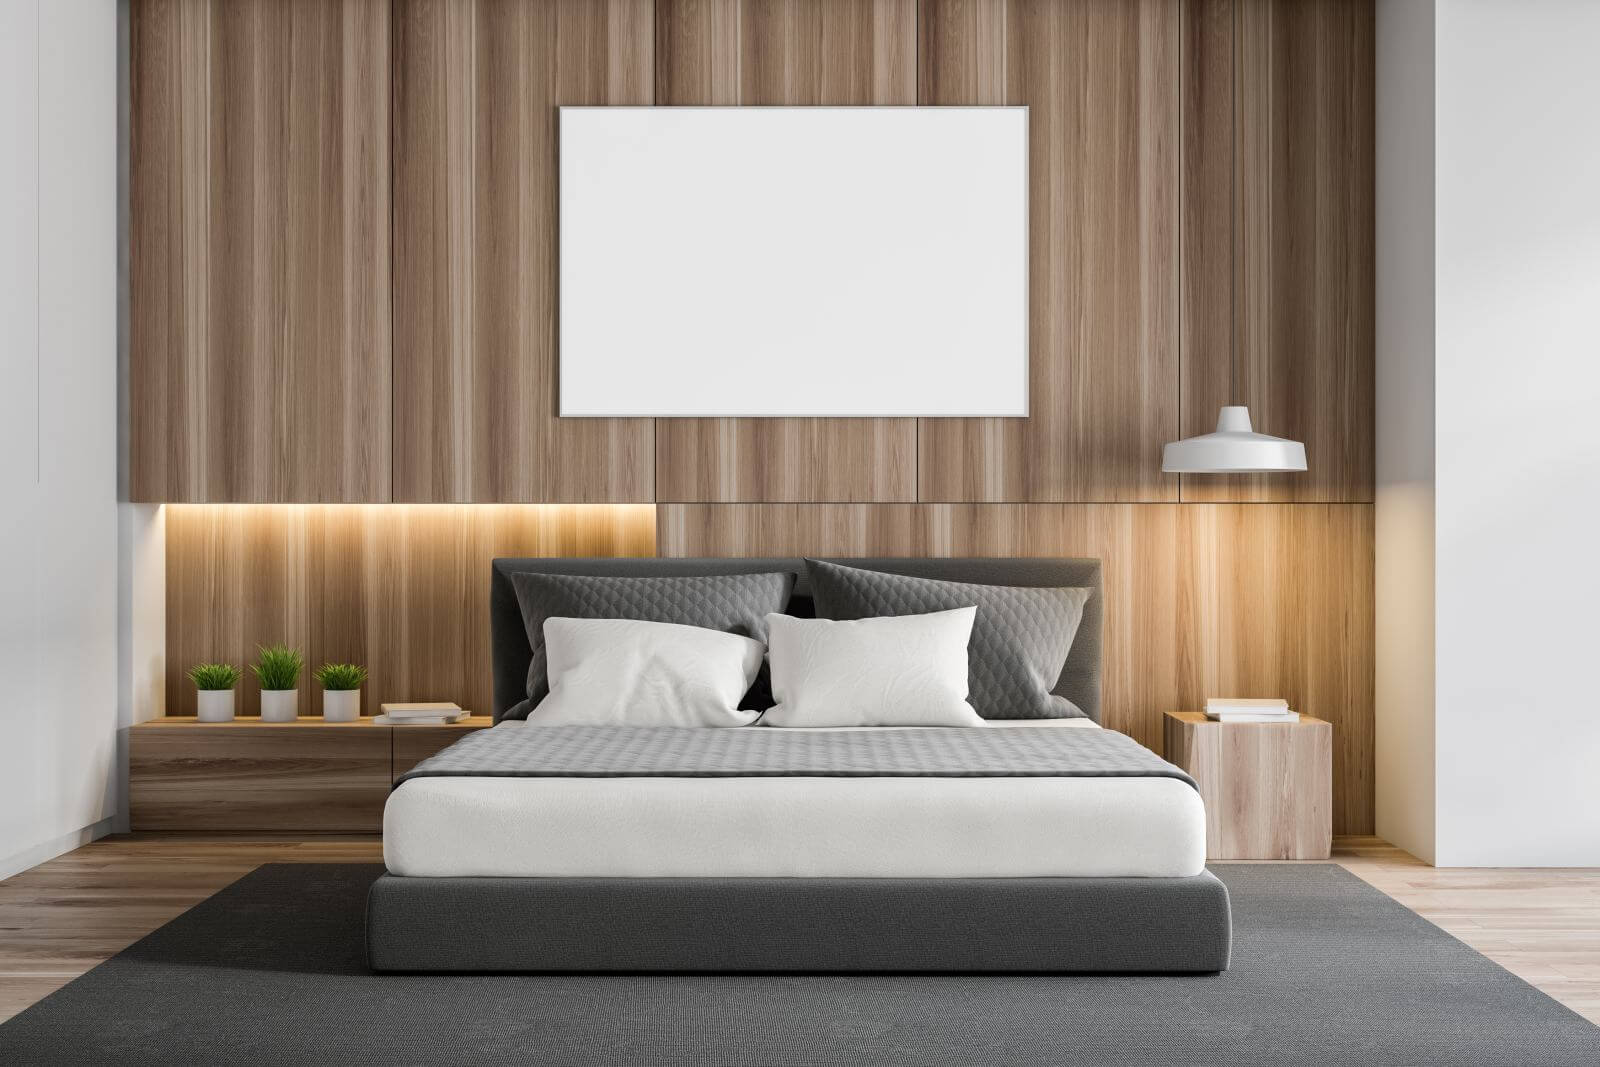 Interior of stylish bedroom with white and wooden walls, wooden floor, gray carpet, master bed and horizontal mock up poster. 3d rendering